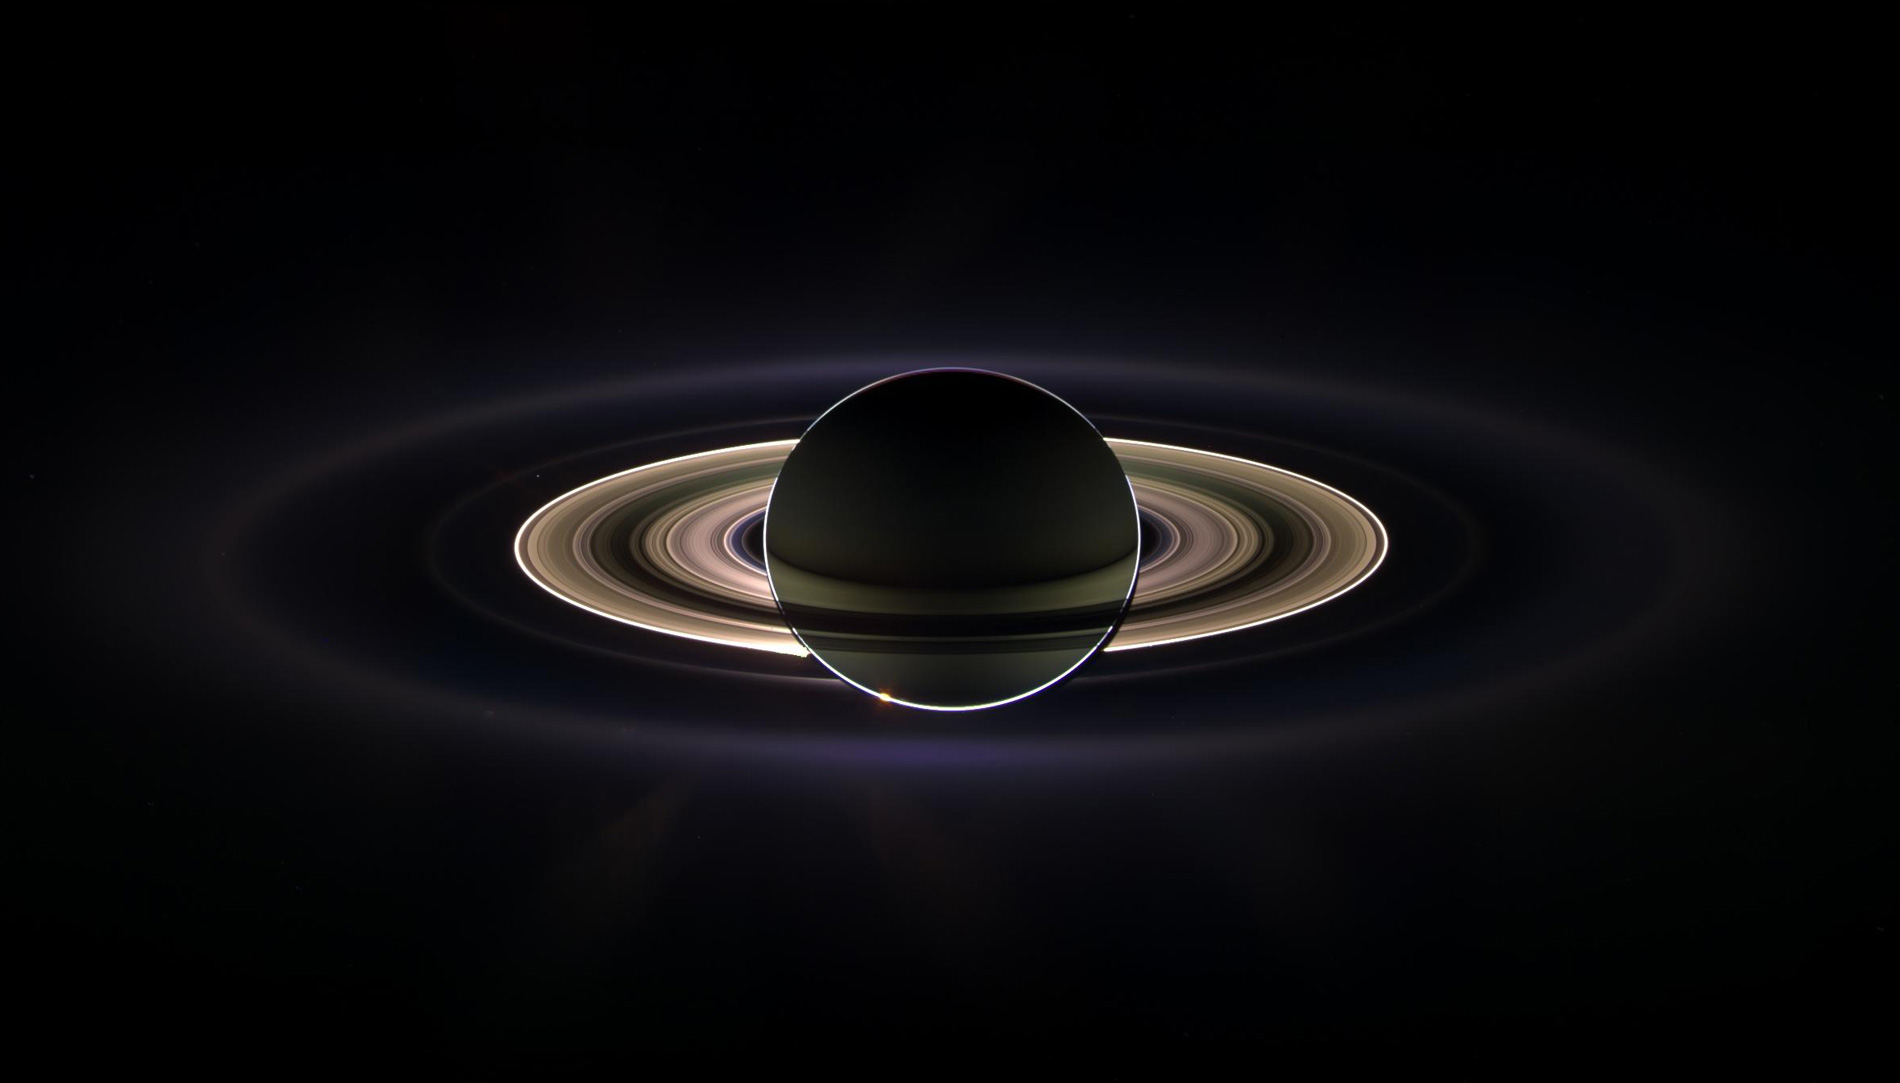 Saturn and its rings photographed from inside the planet's shadow by the Cassini spacecraft.